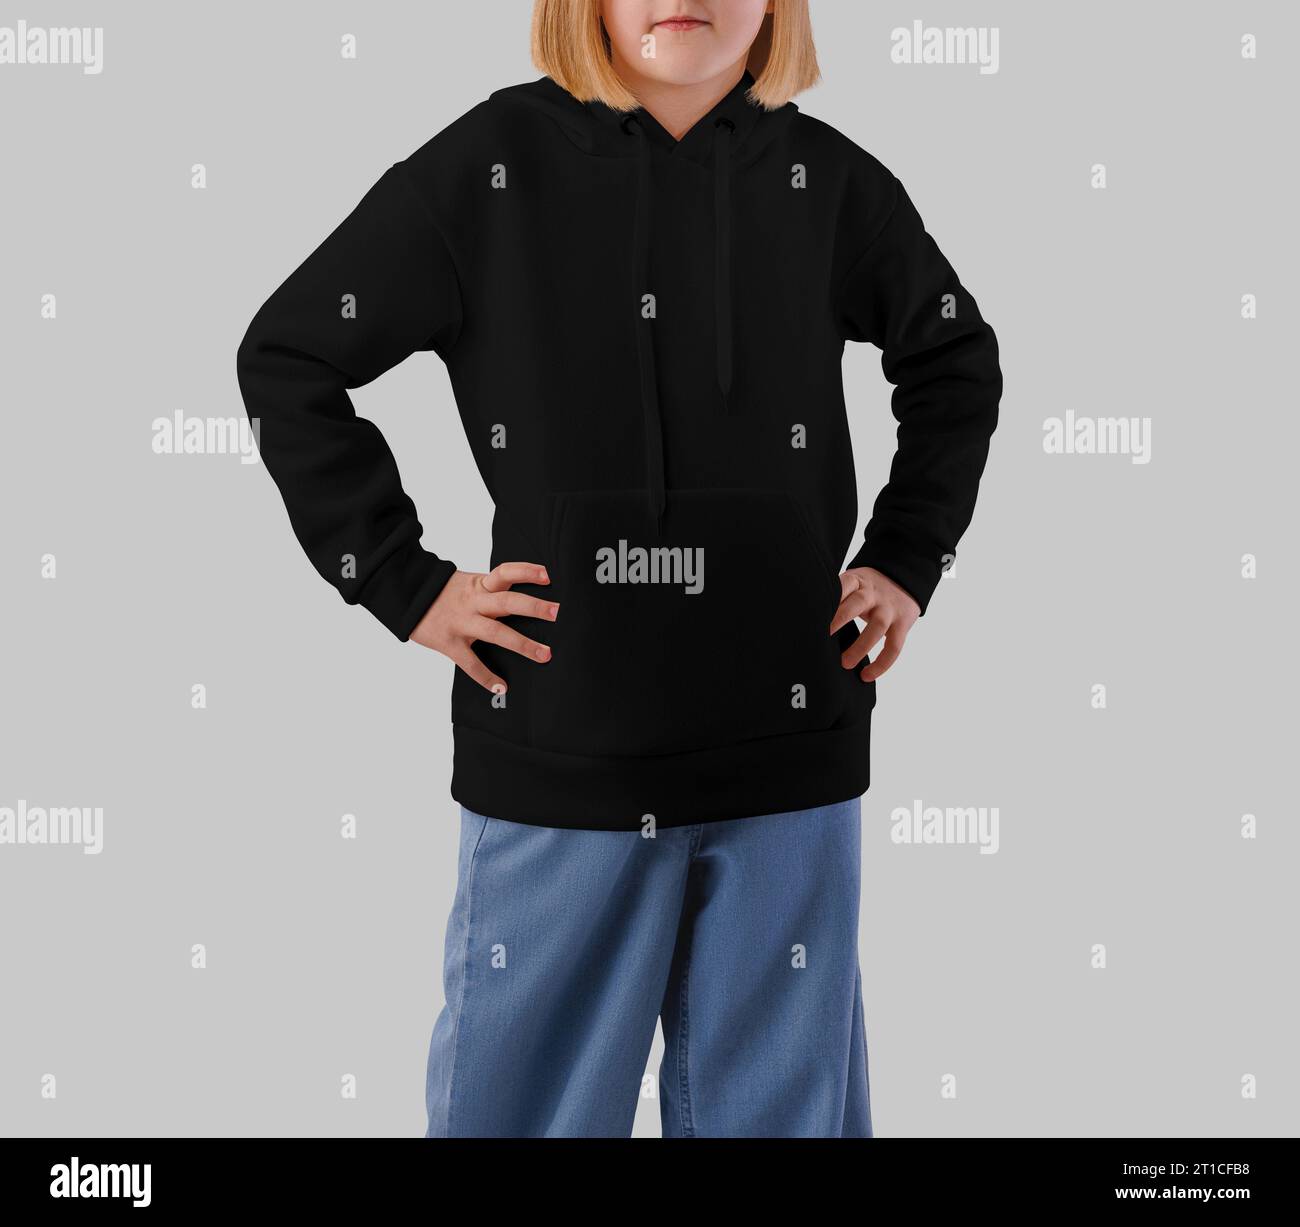 Template of a black hoodie on a posing girl, front view, shirt for design, branding. Mockup of textured kid's clothing, isolated on the background. Pr Stock Photo